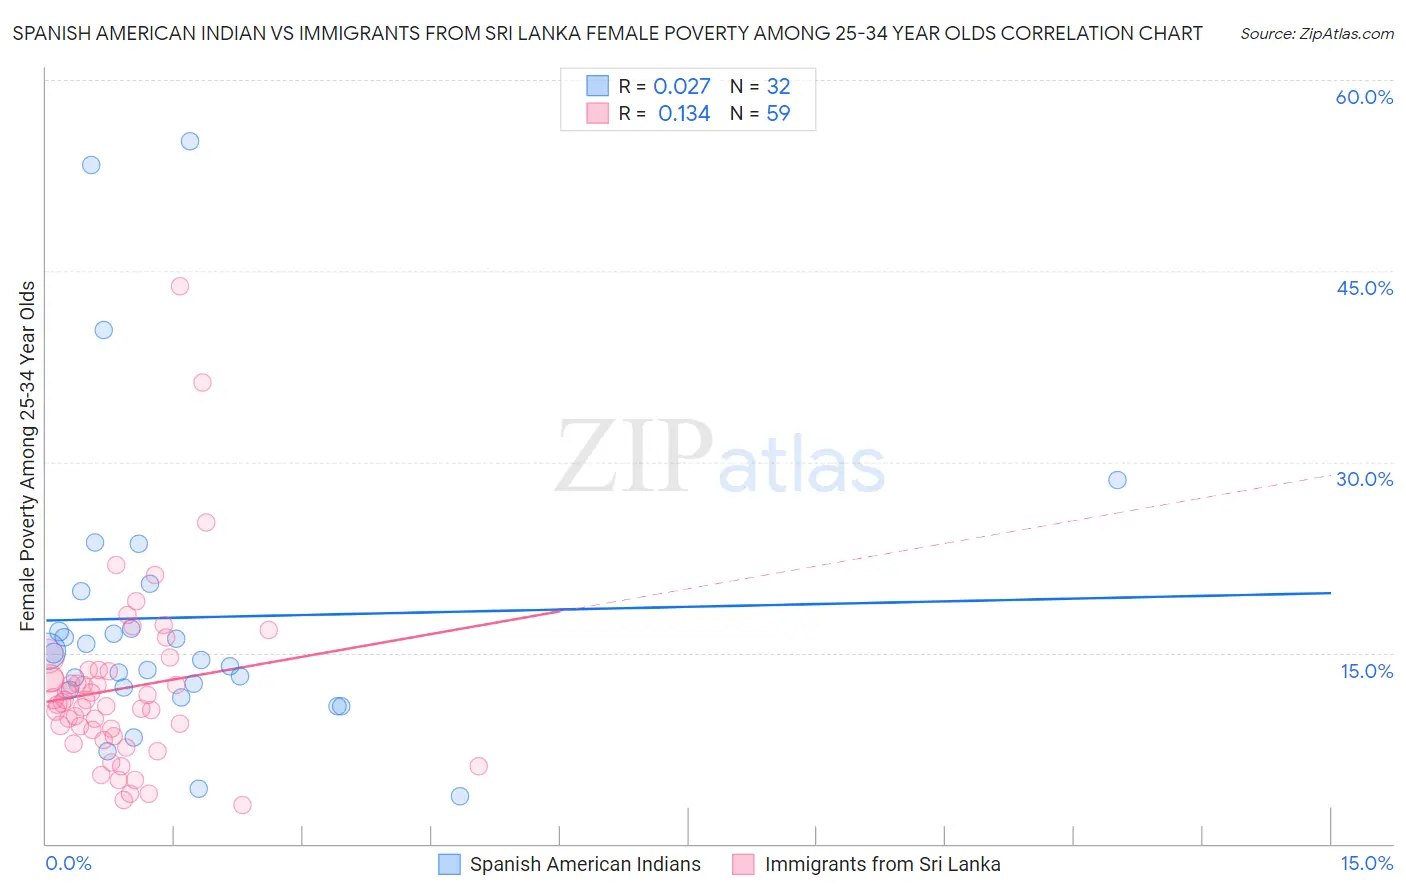 Spanish American Indian vs Immigrants from Sri Lanka Female Poverty Among 25-34 Year Olds